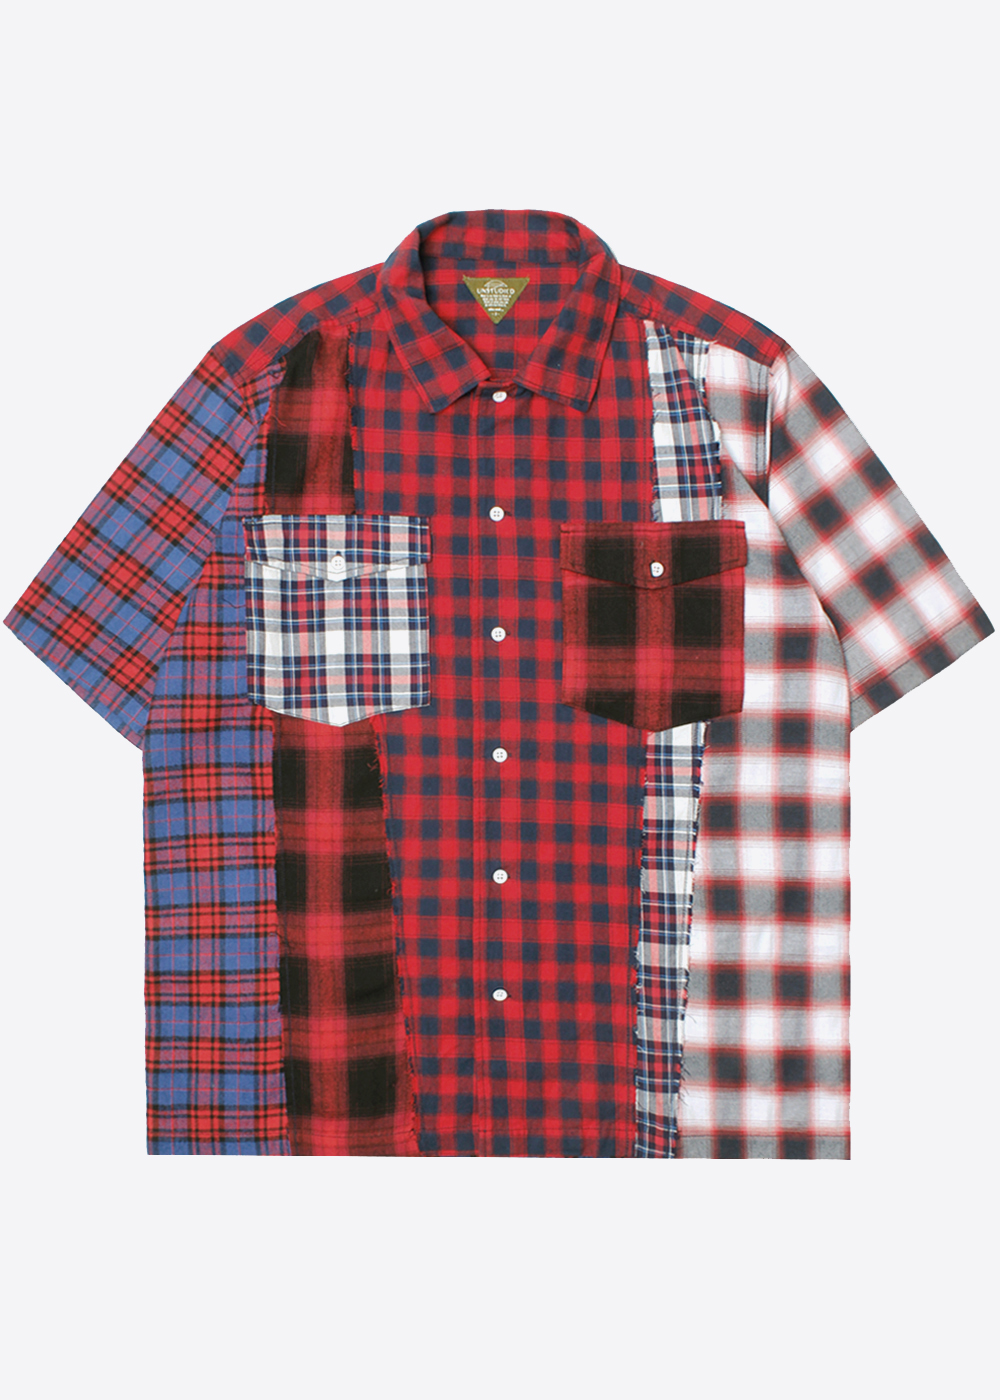 UNSTUIDIED BY NIKO AND’over fit’cotton patchwork rebuild shirt